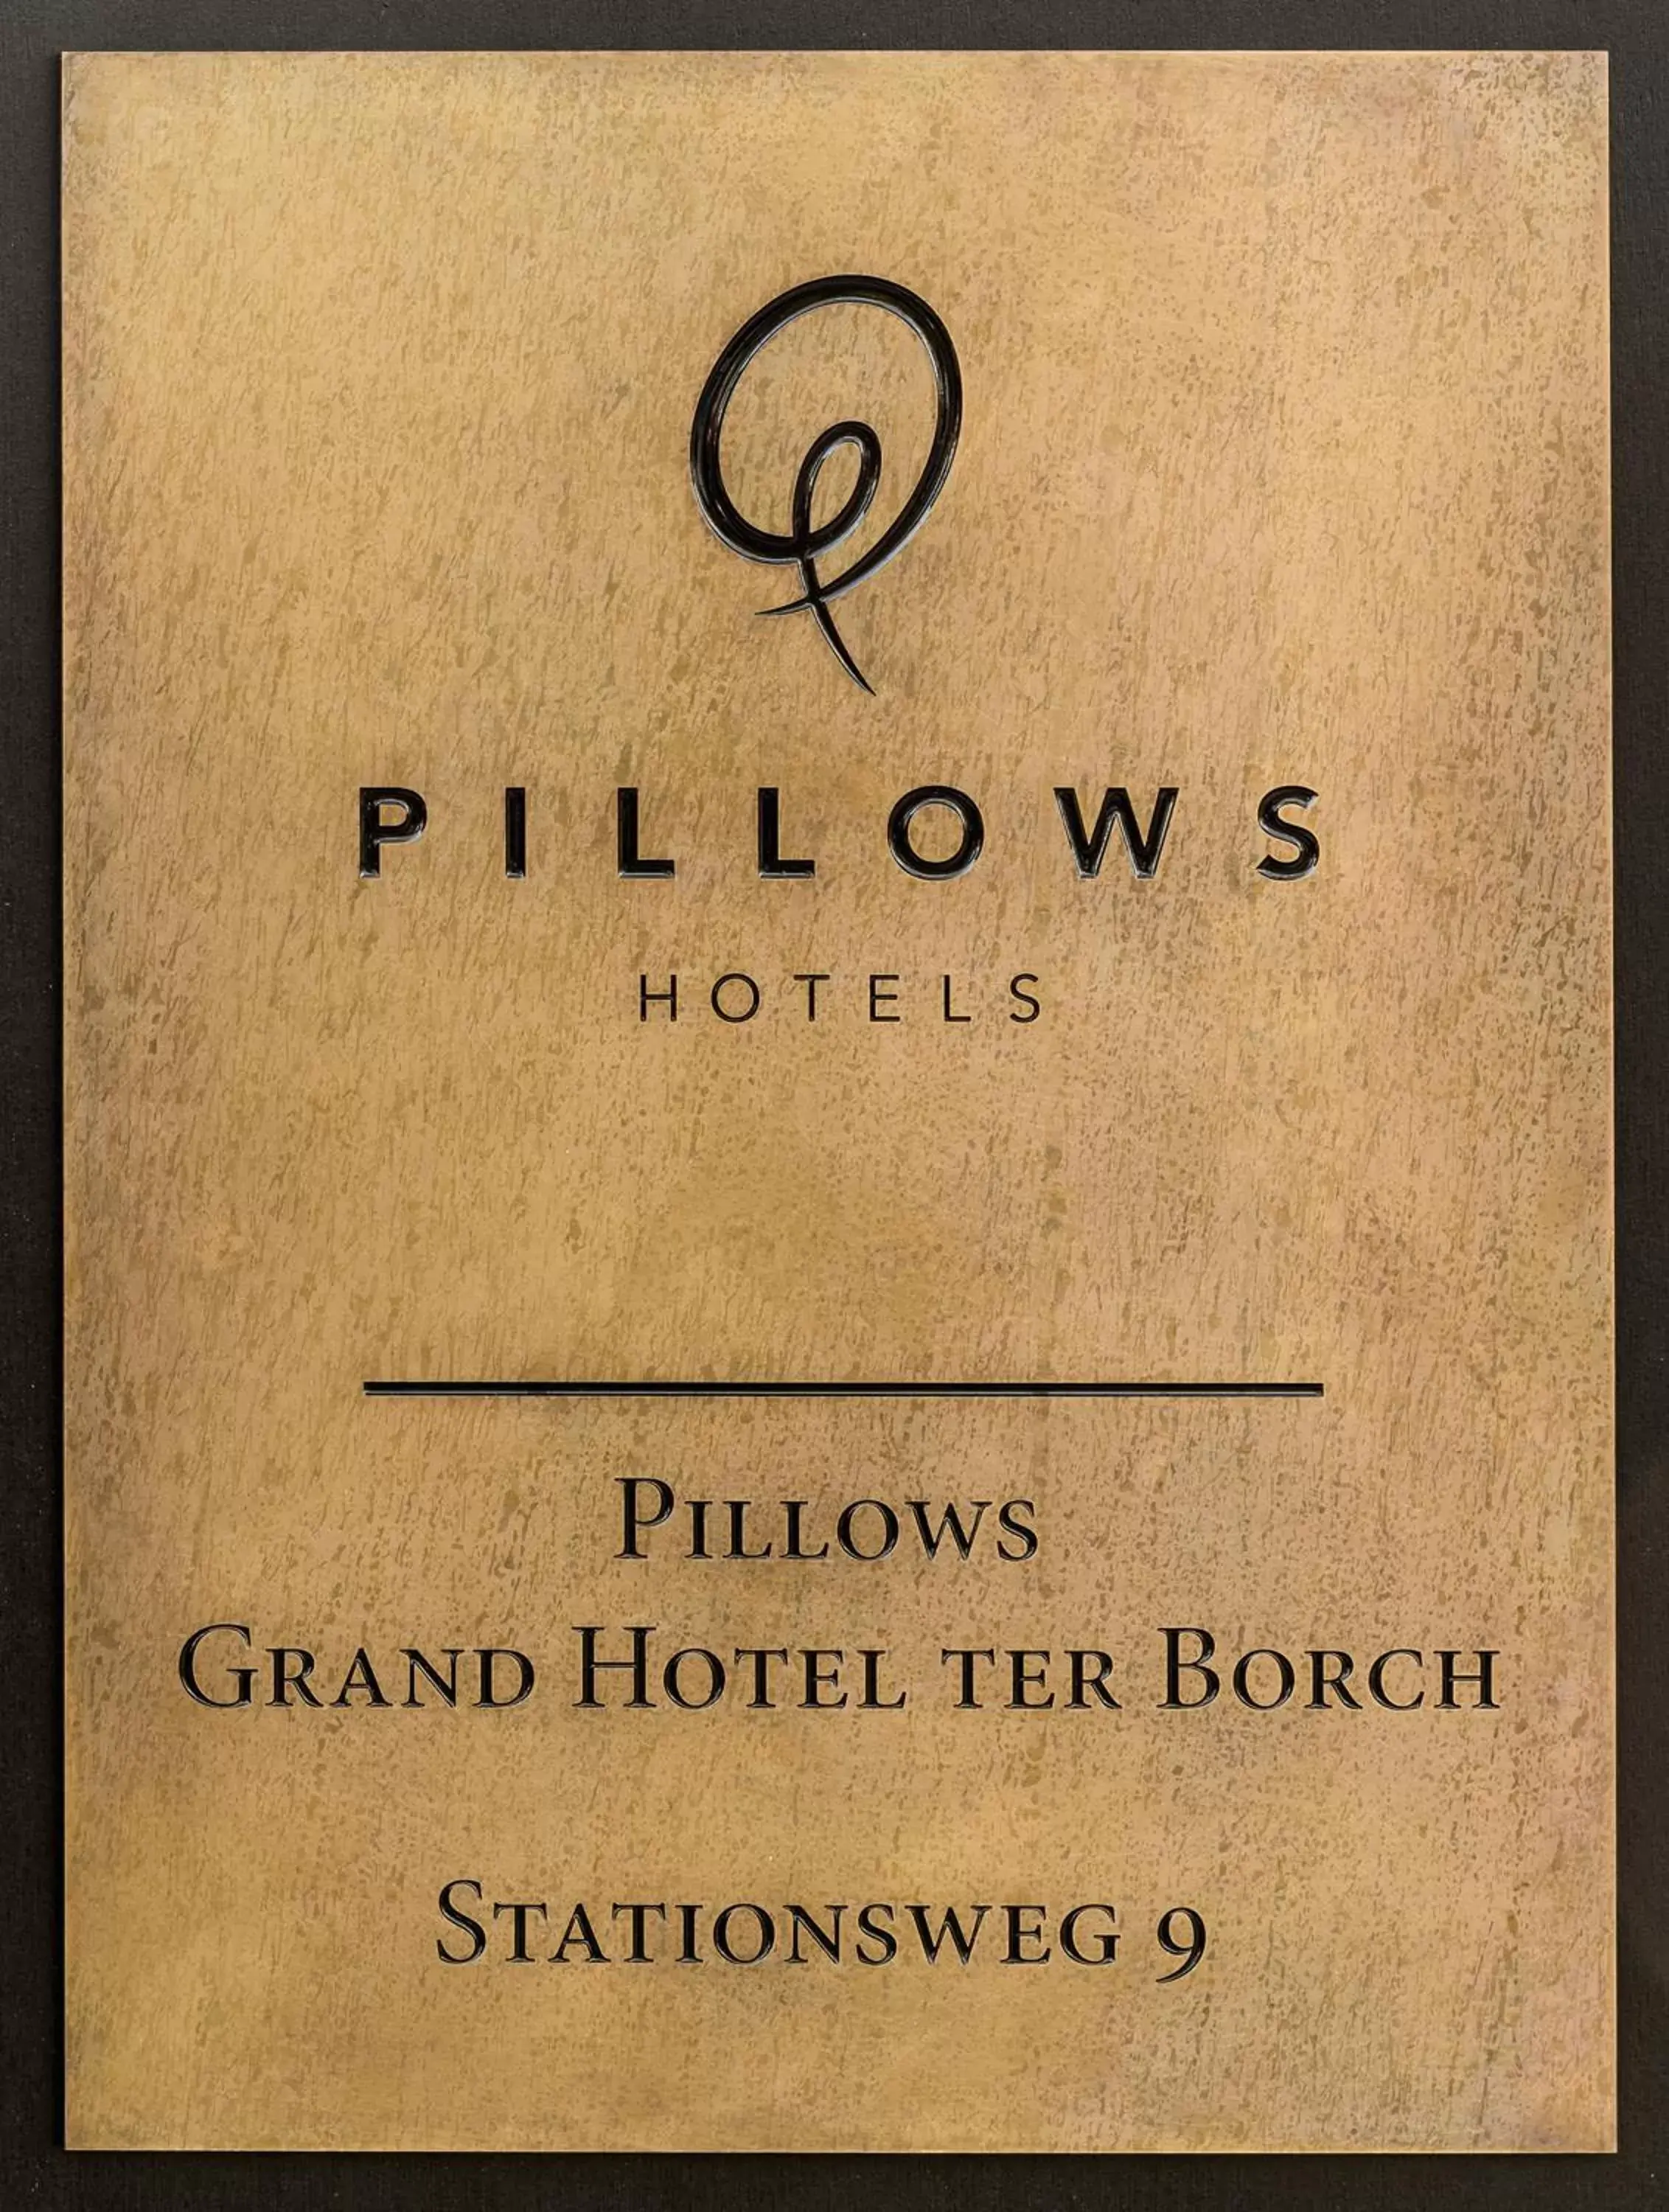 Decorative detail in Pillows Grand Boutique Hotel Ter Borch Zwolle